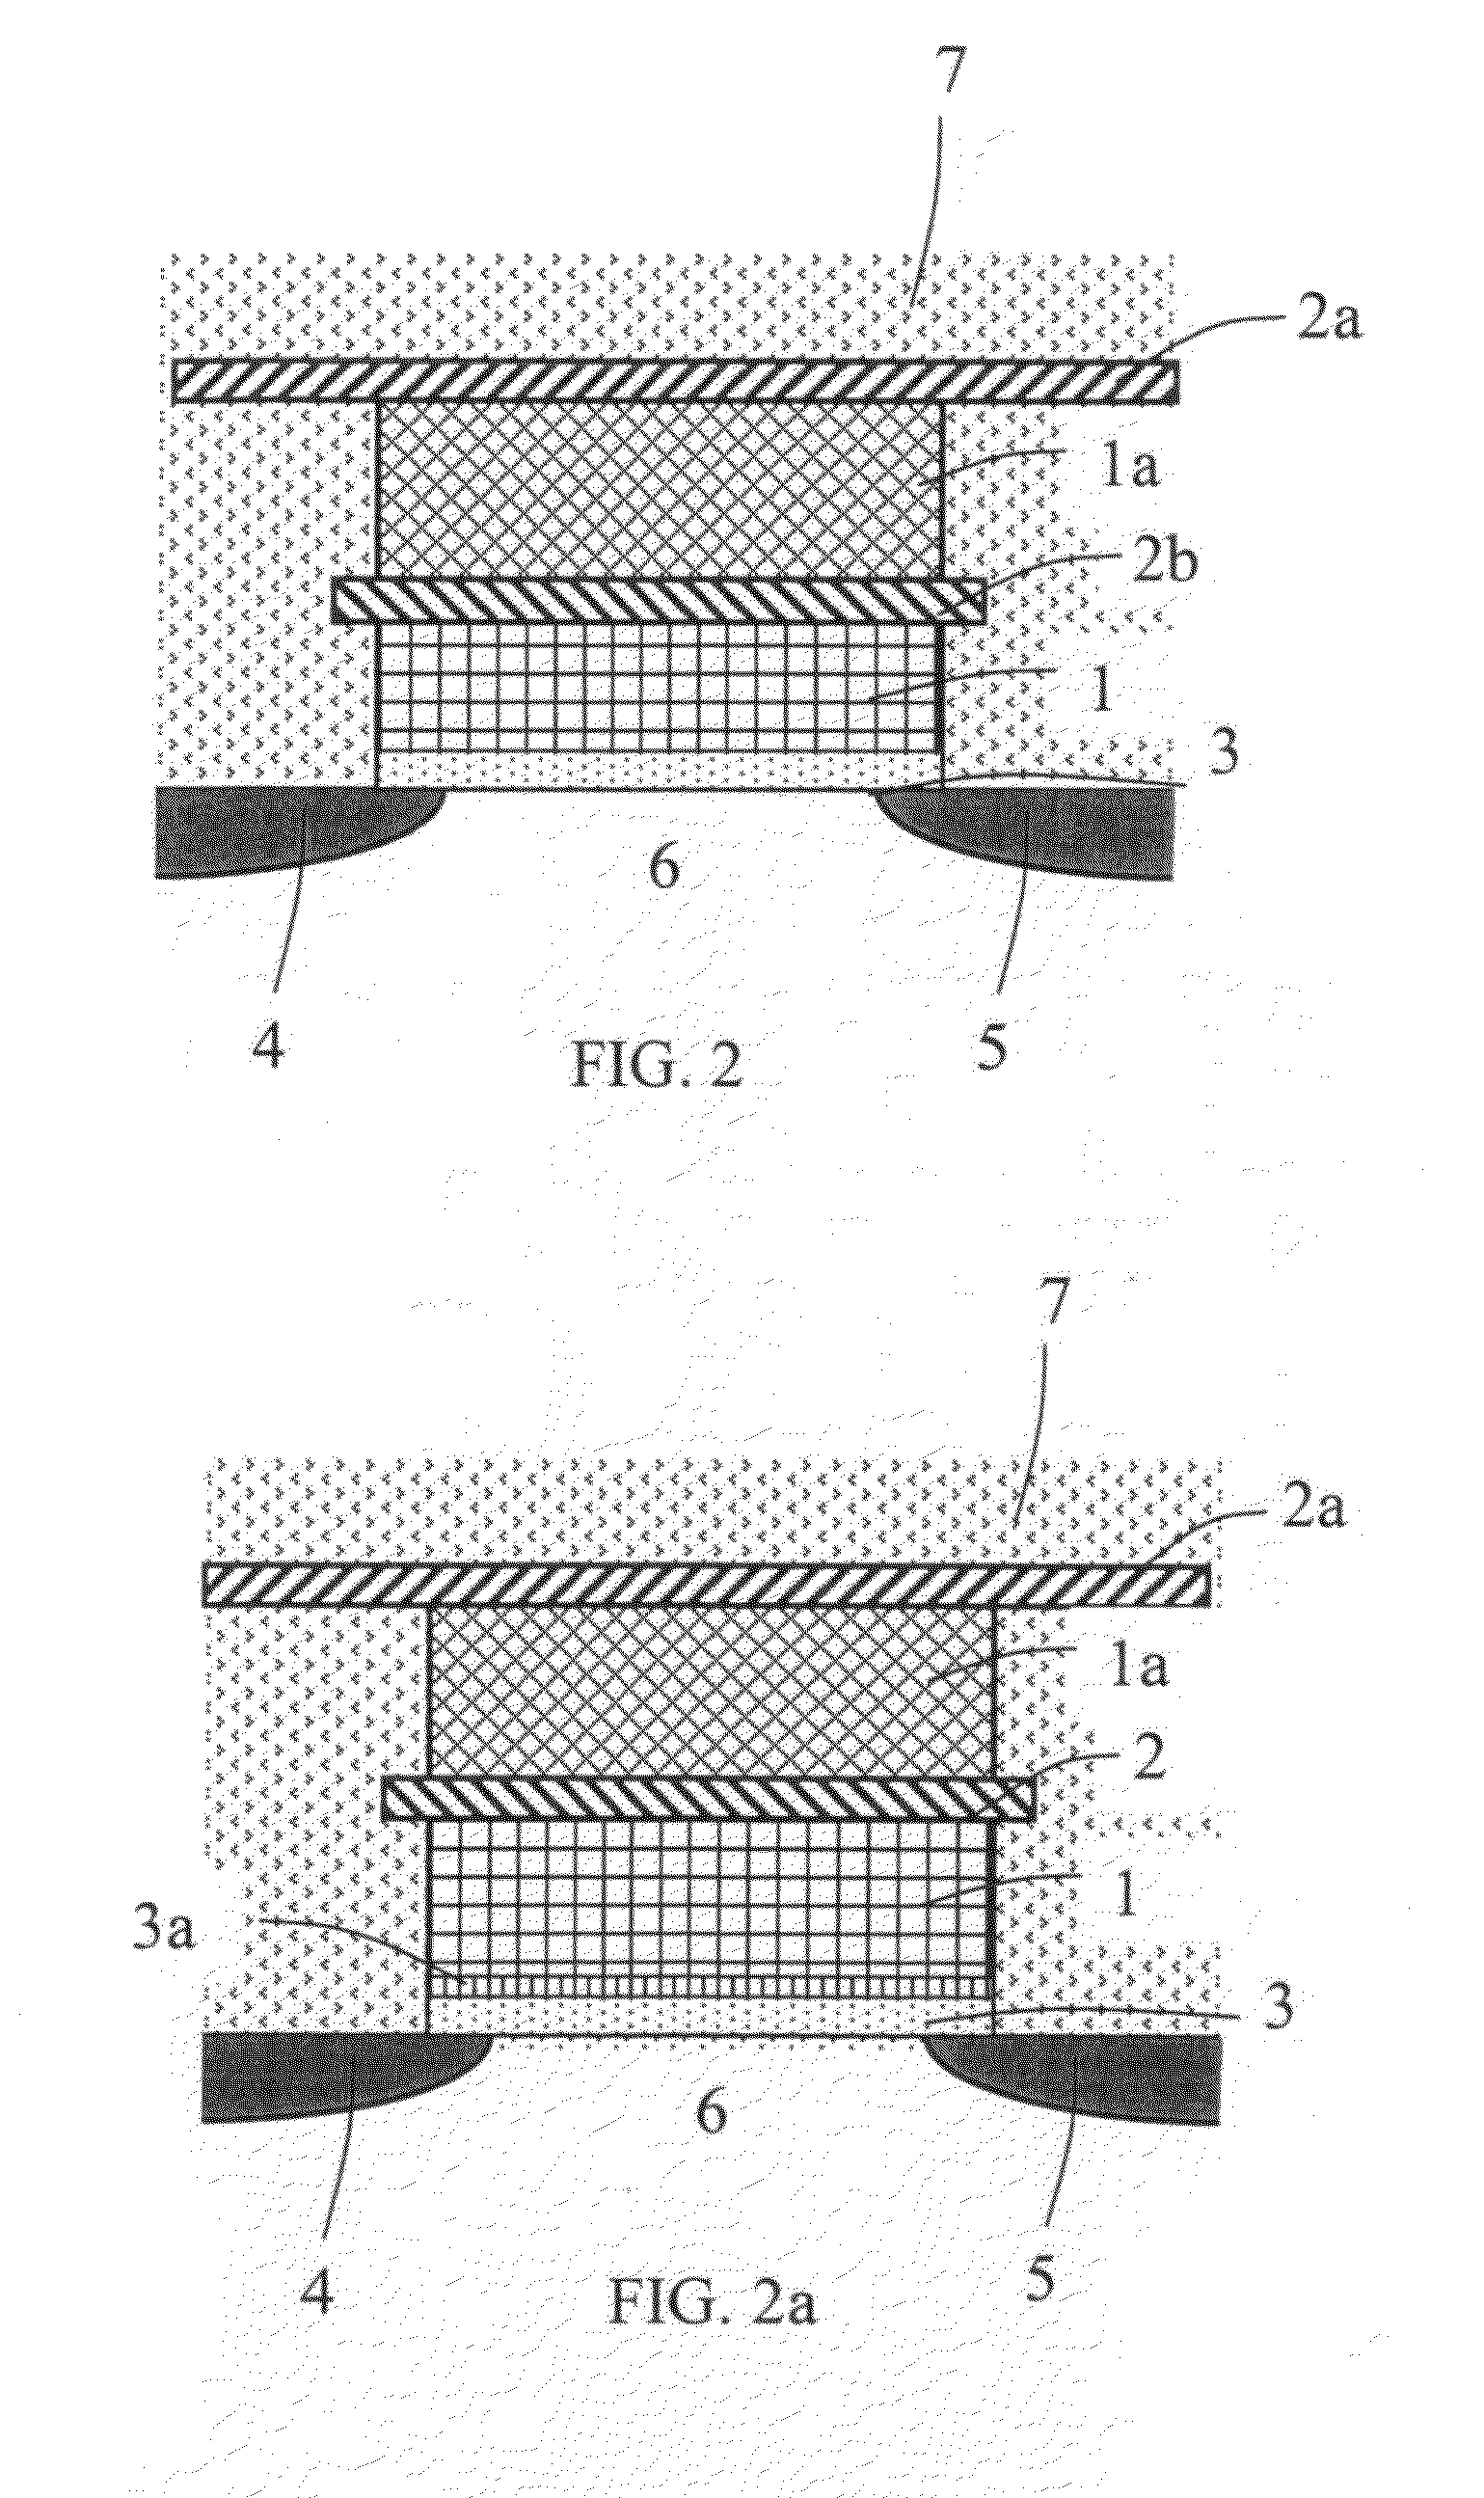 Nondestructive methods of reading information in ferroelectric memory elements